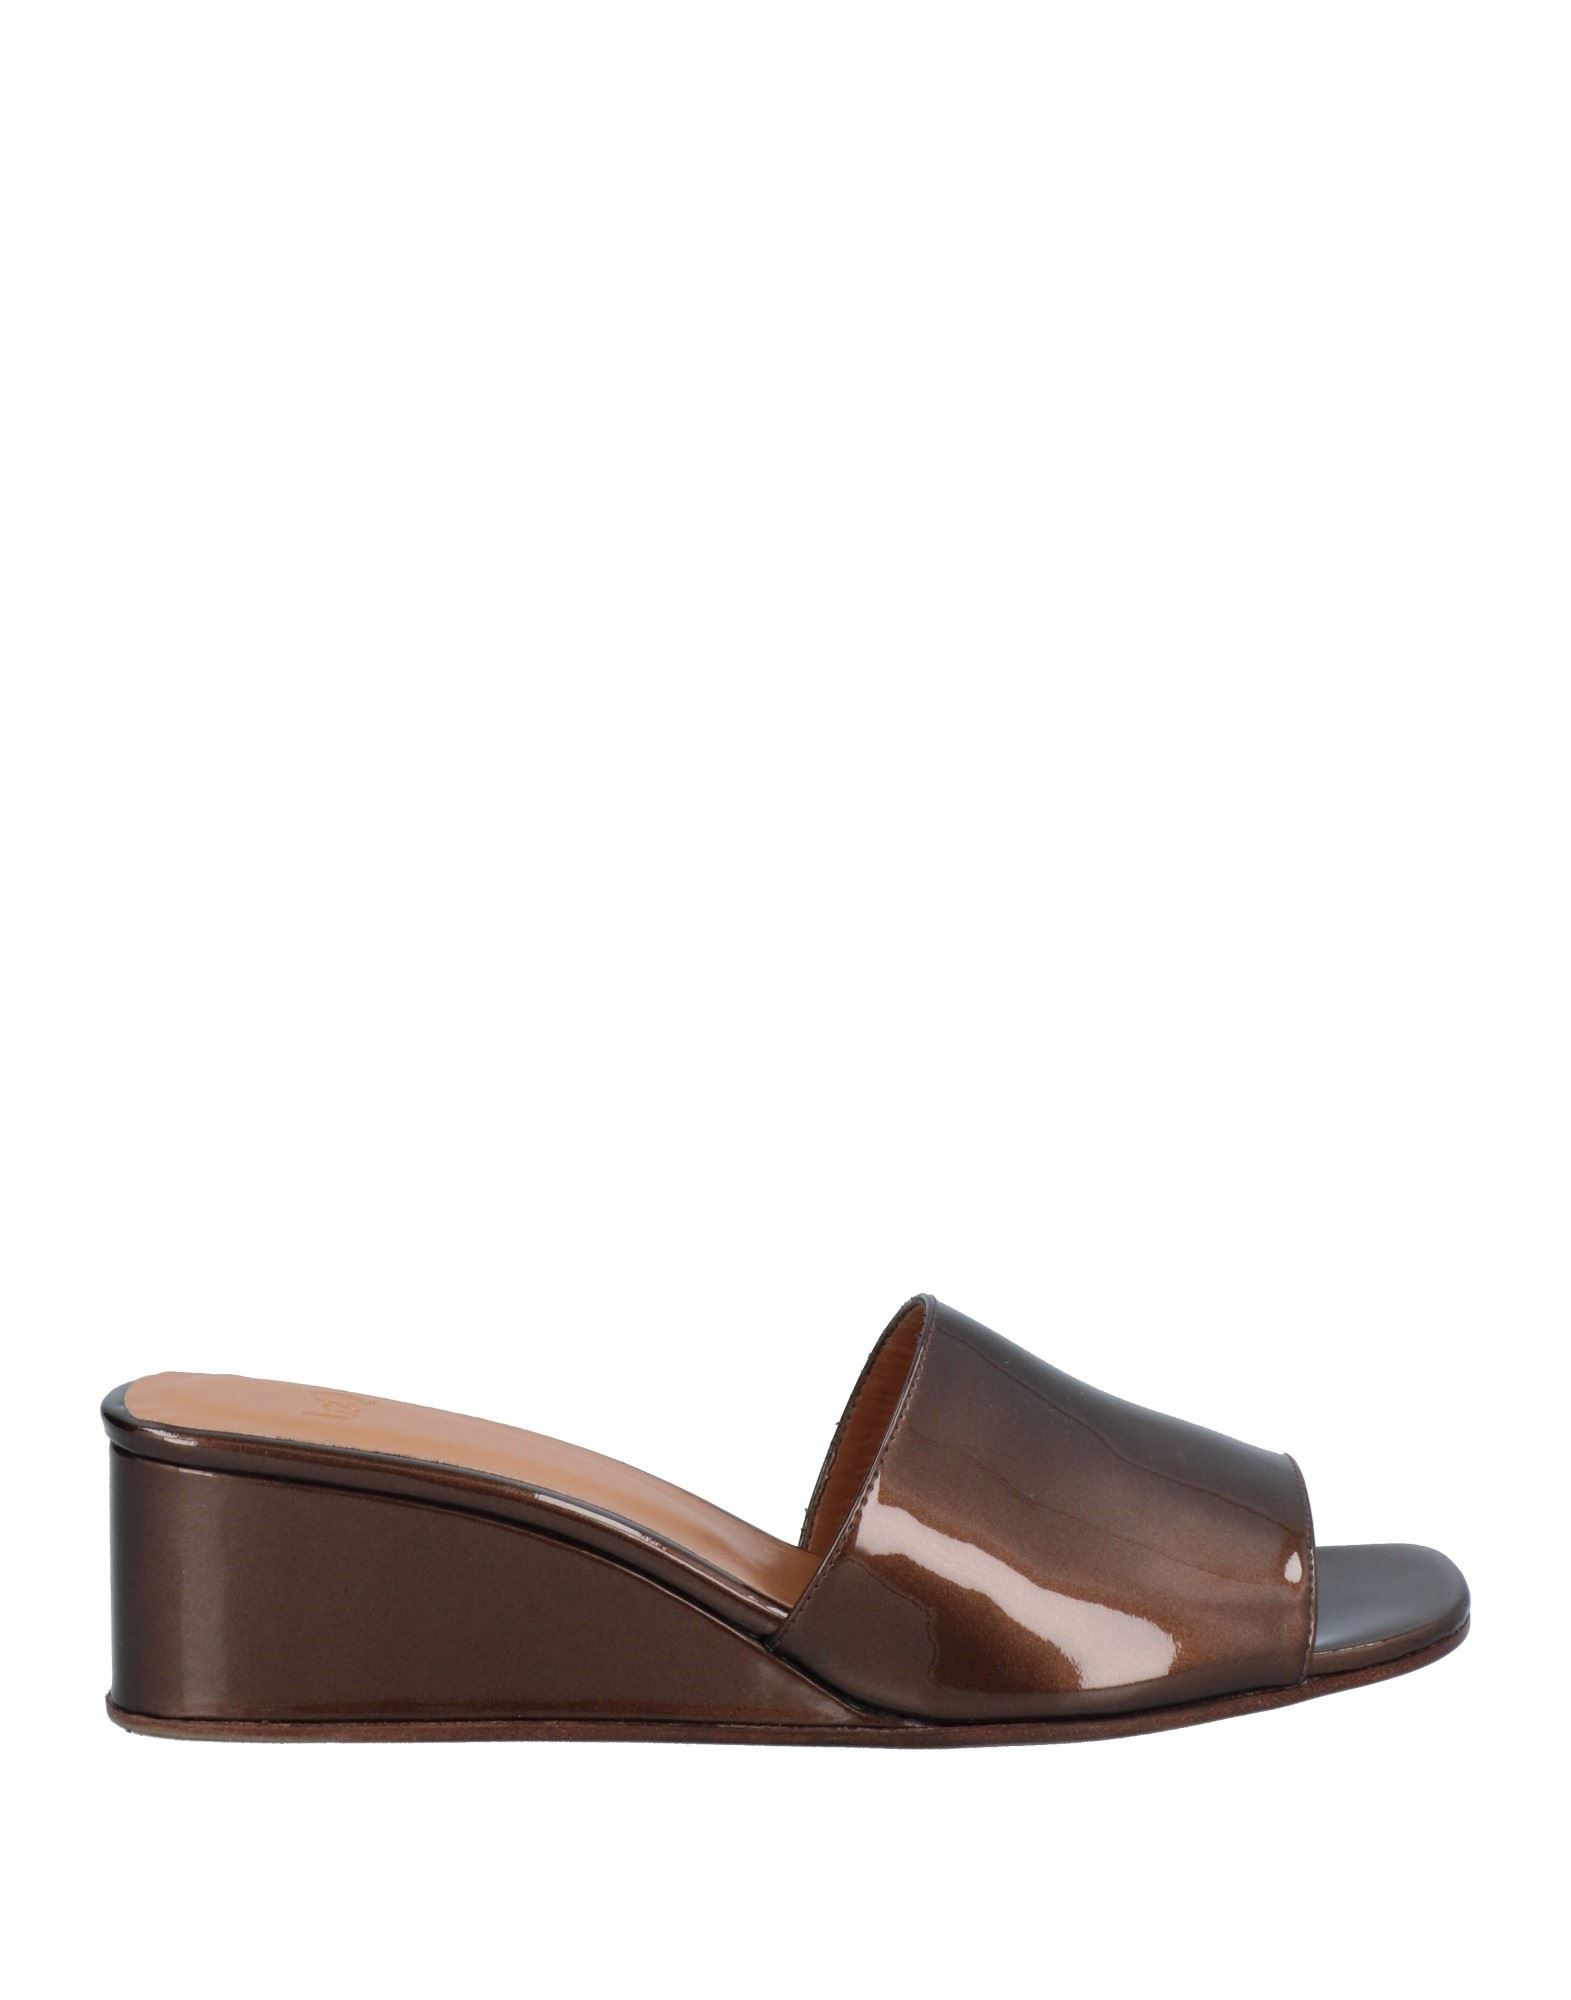 Loq Sandals In Brown